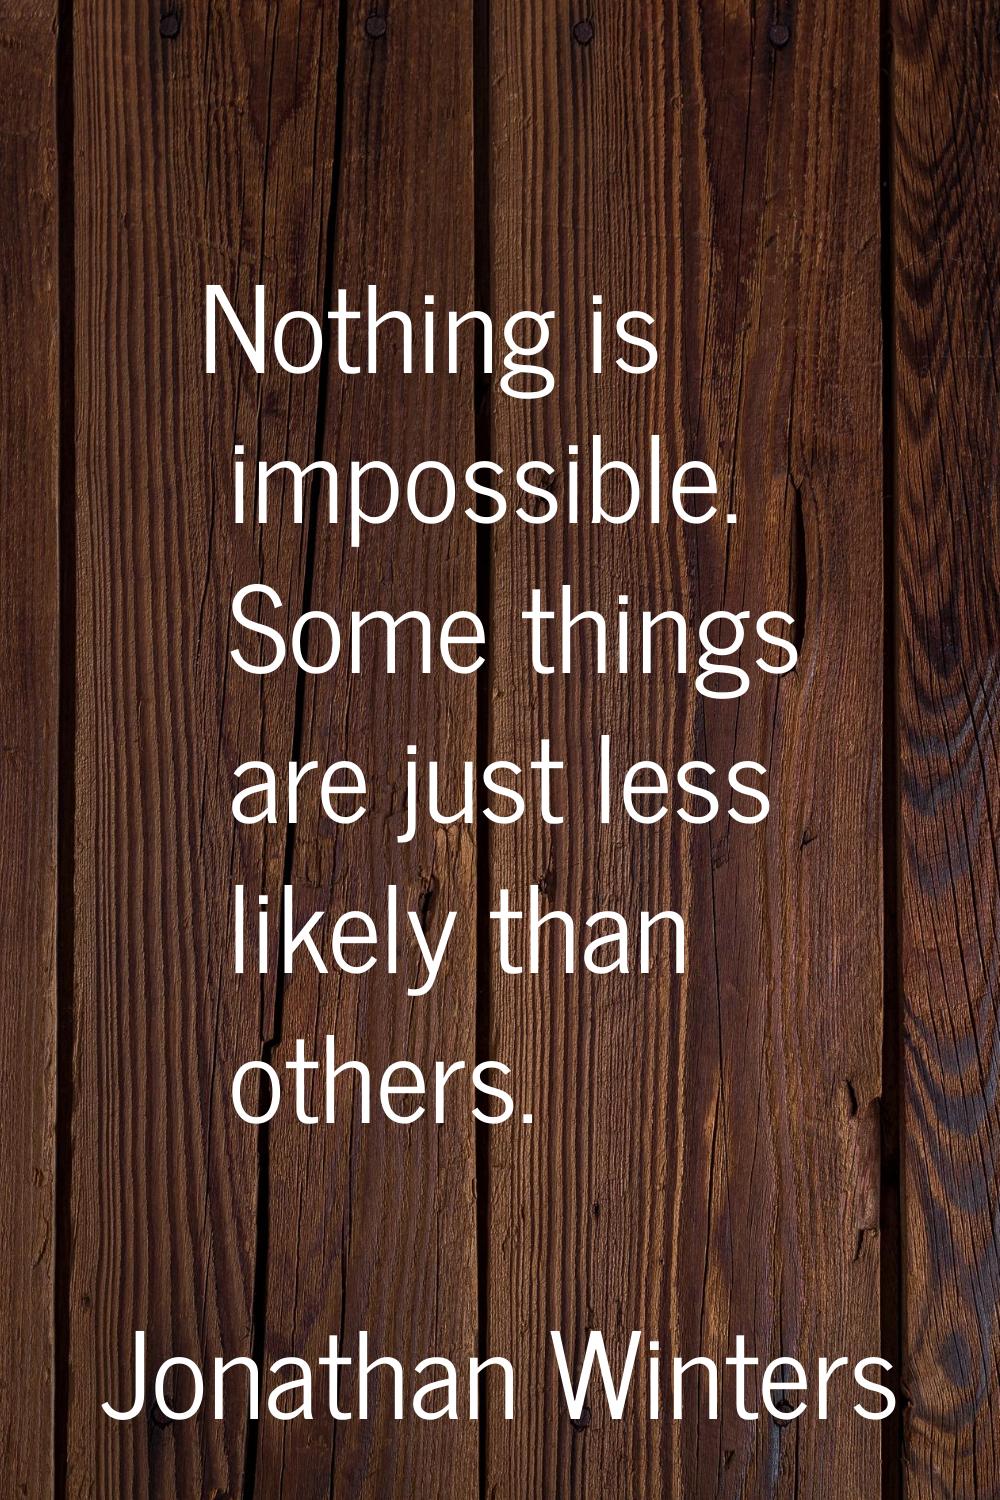 Nothing is impossible. Some things are just less likely than others.